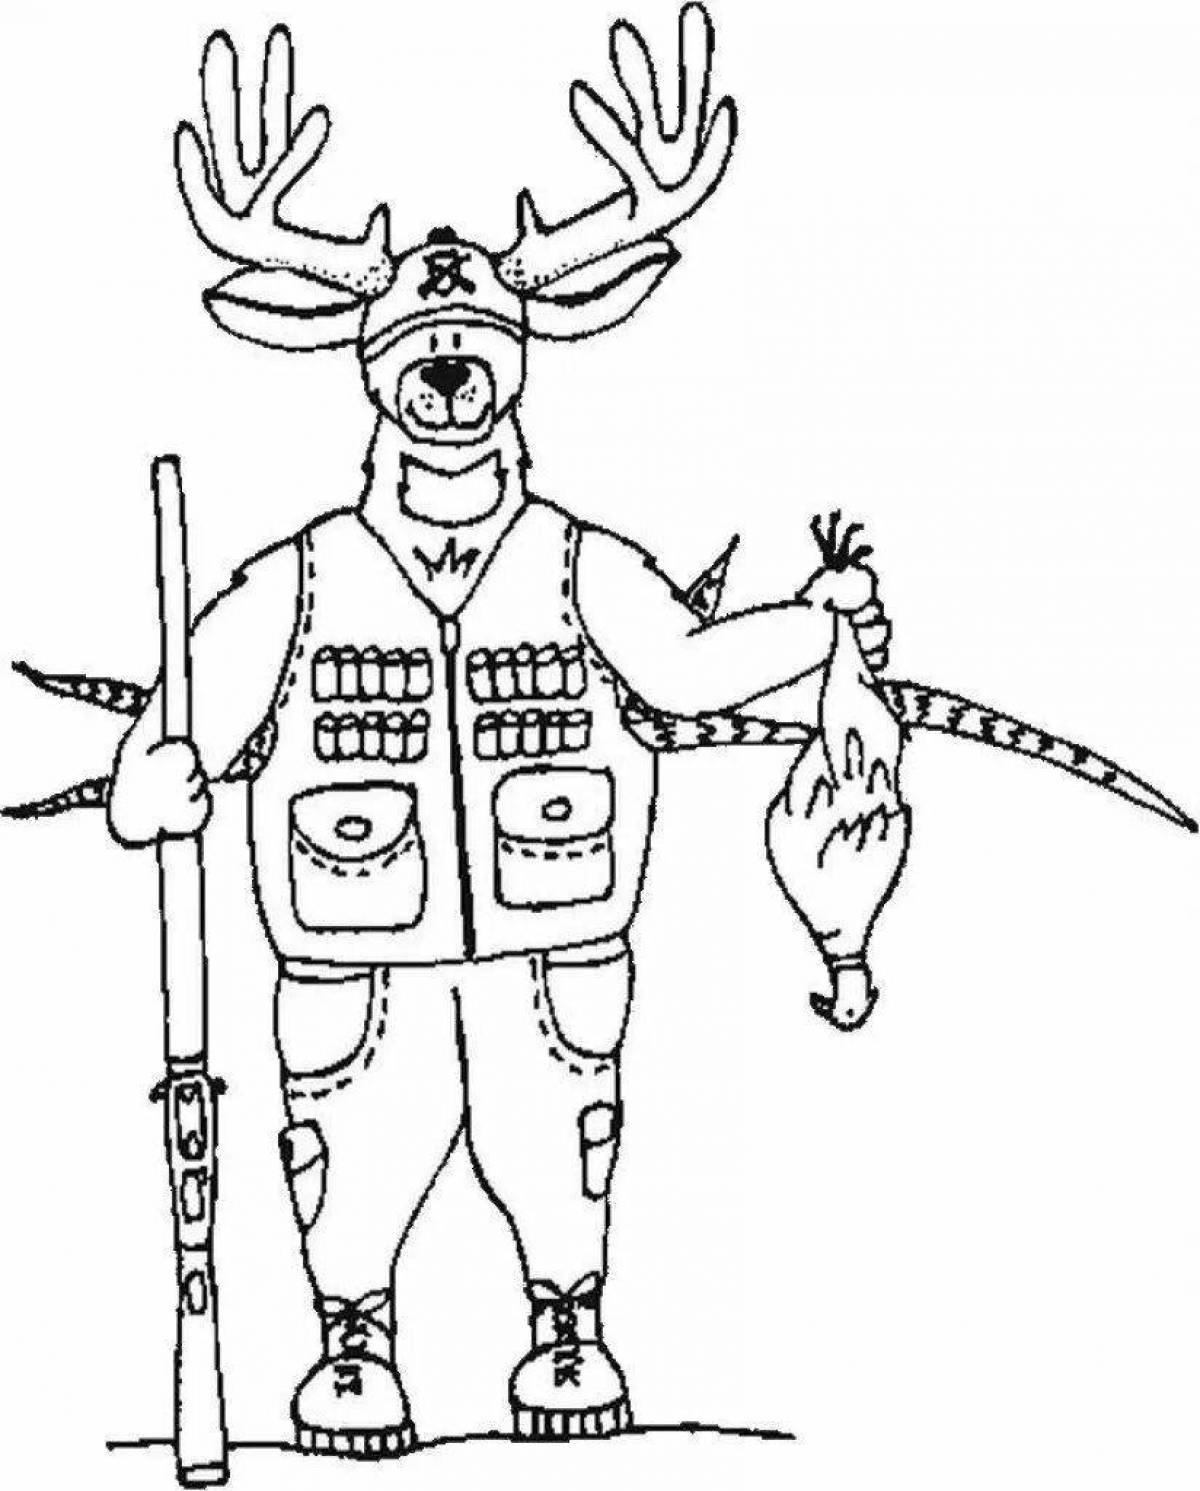 Adorable hunter coloring page for kids